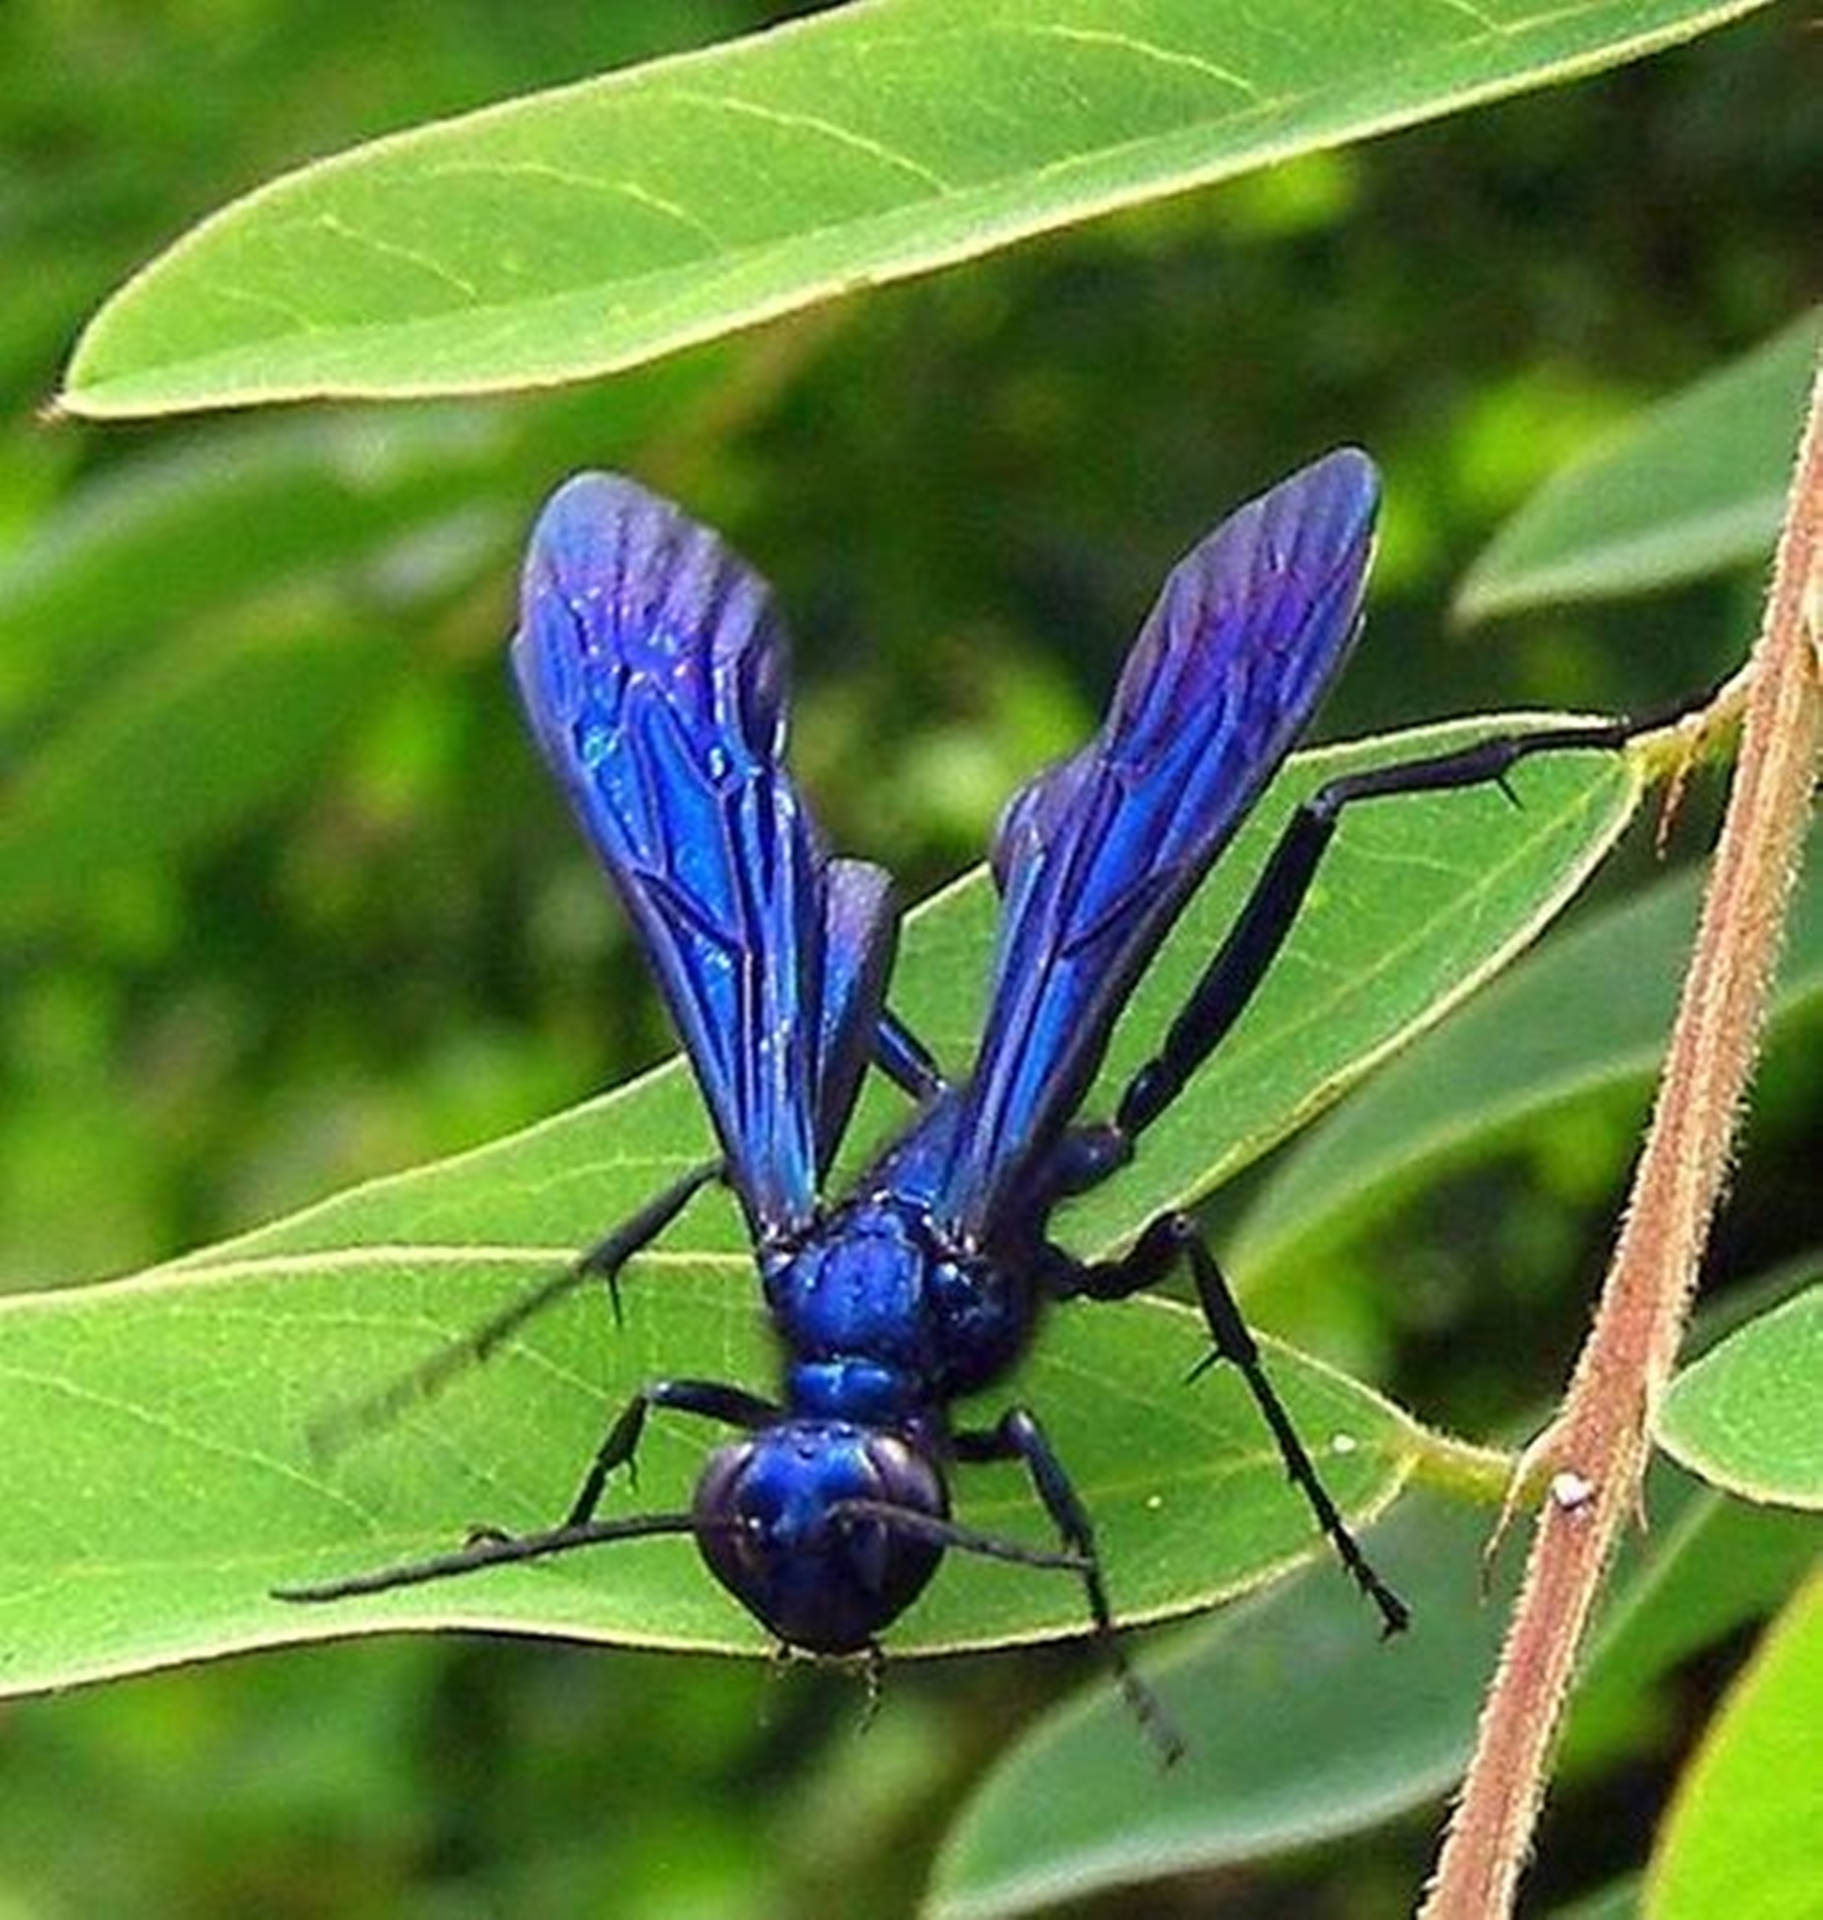 Vibrant Blue Mud Dauber Wasp Isolated on Lush Green Leaves Wallpaper